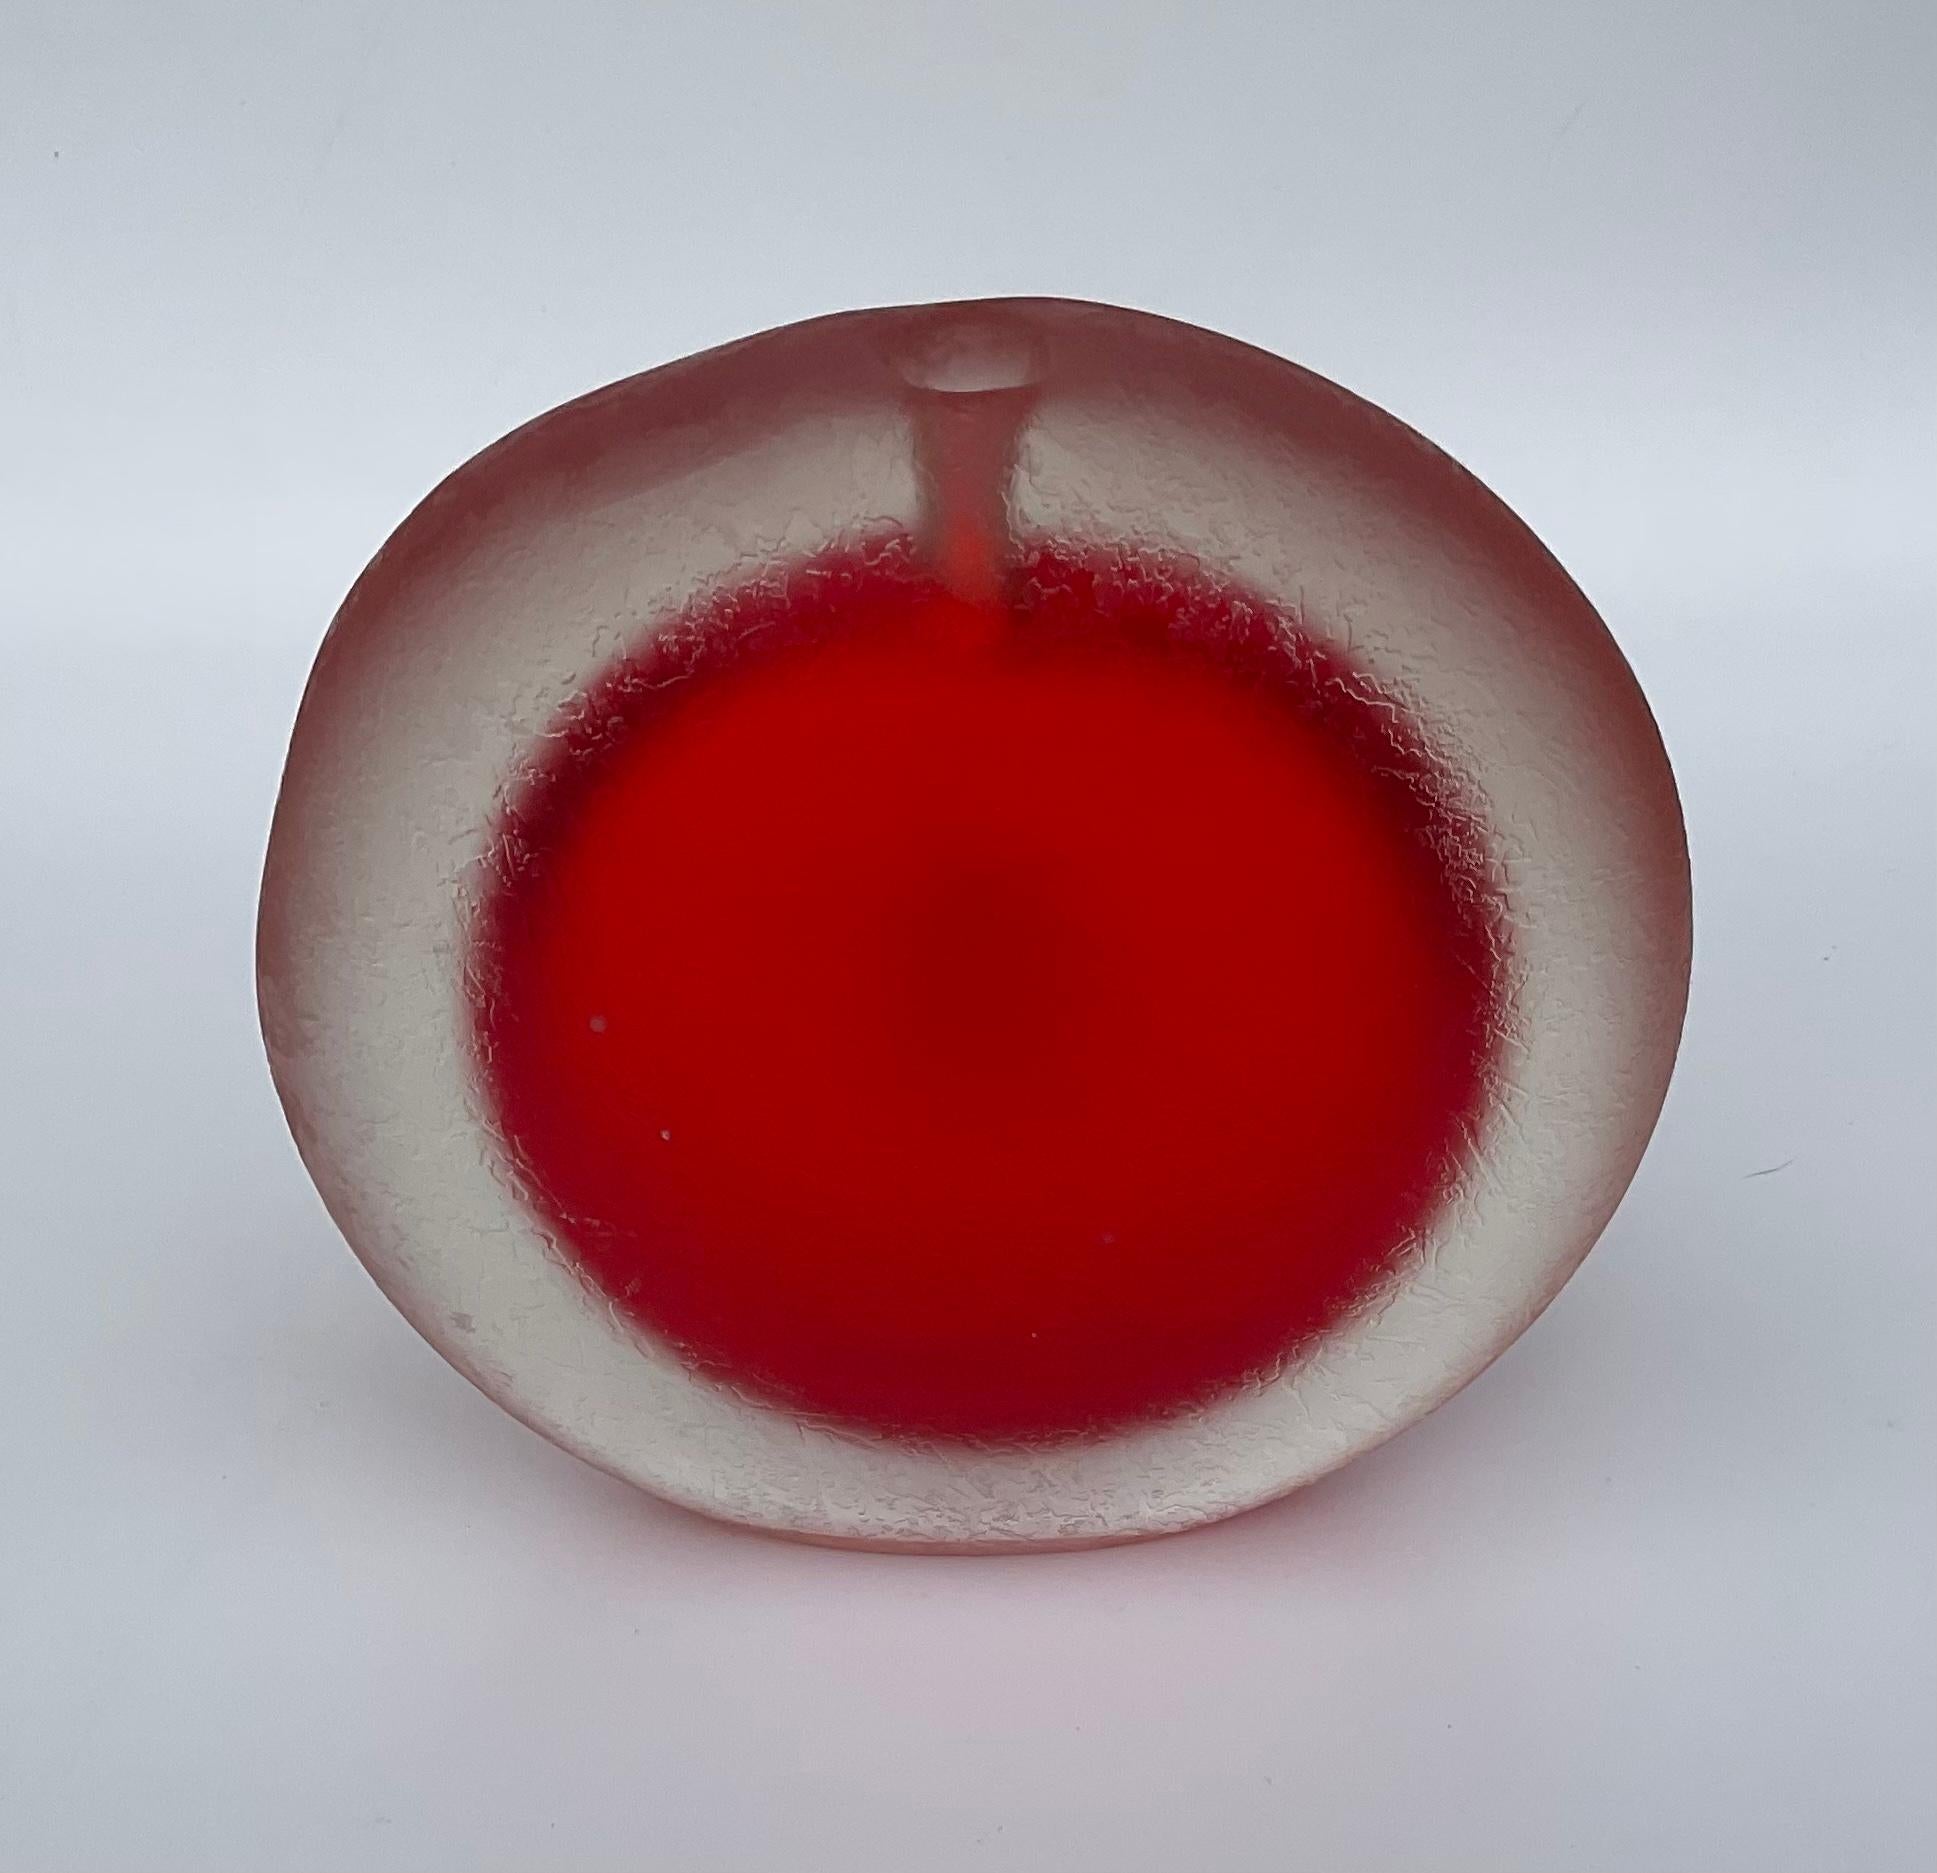 Alfredo Barbini Brilliant Red Murano Art Glass Sommerso Corroso Vase. Corroso glass or corroded is an artificial stone like finish achieved by exposing the glass to fluoridic acid.